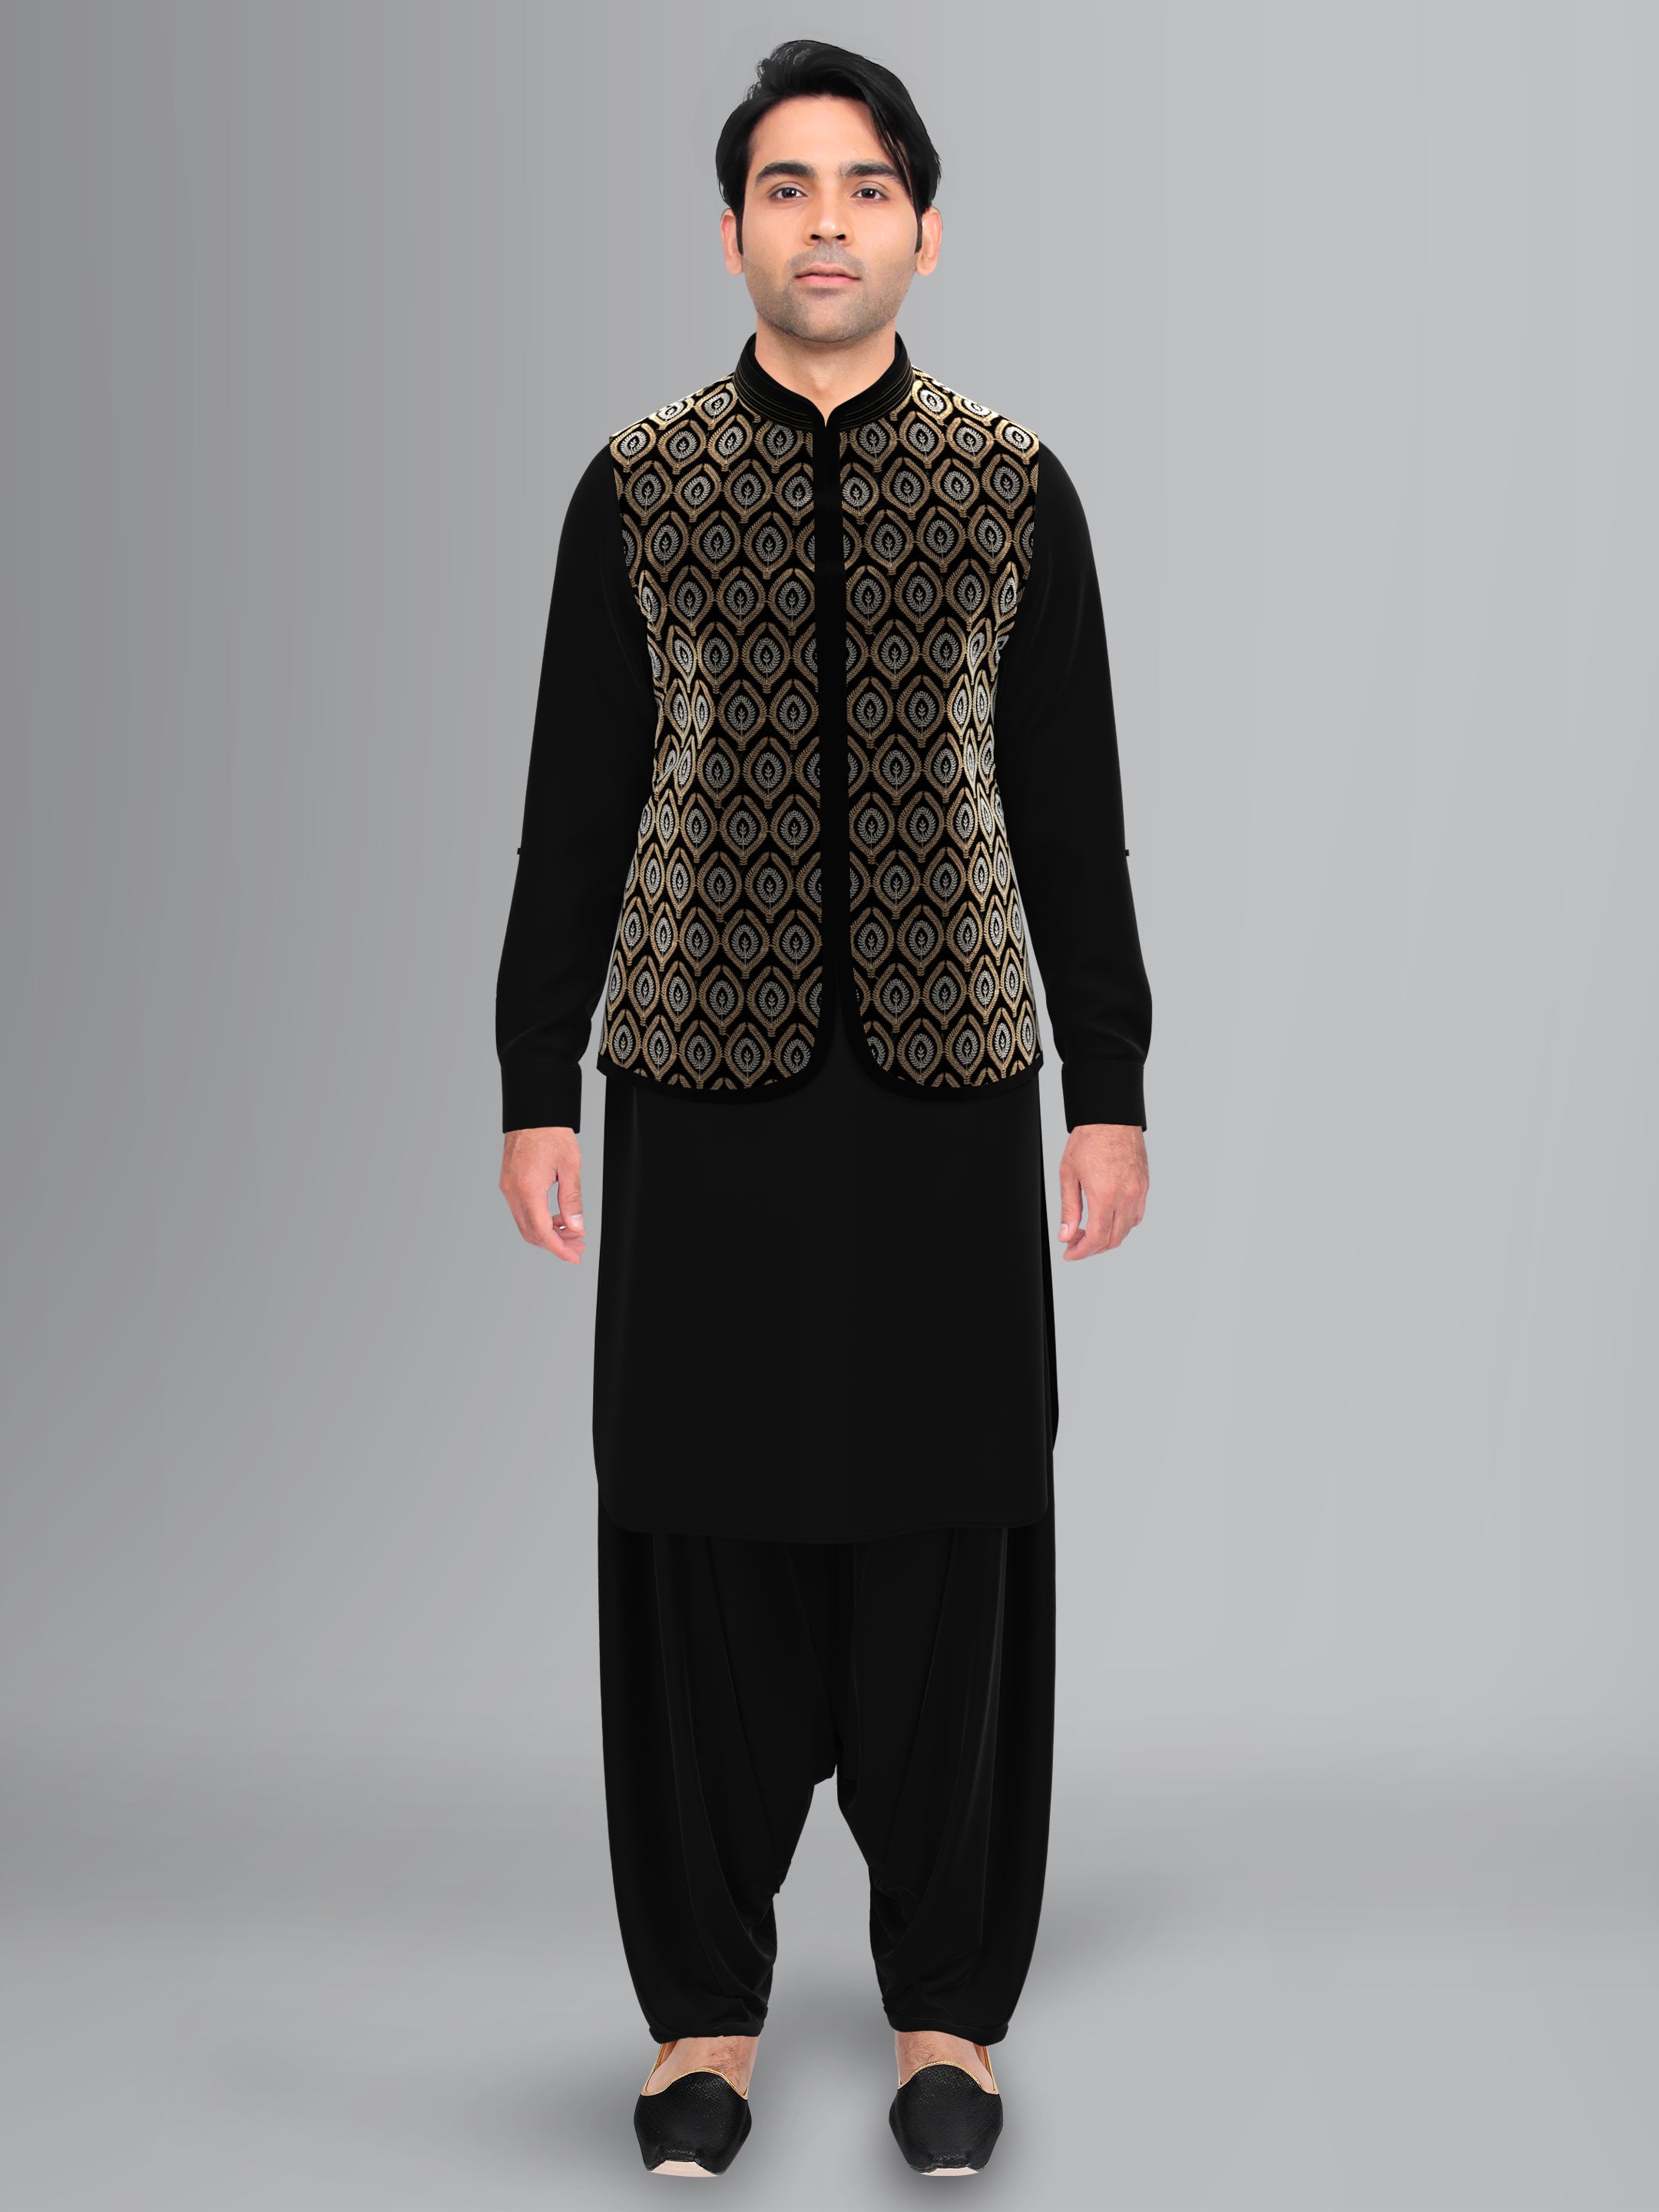 Buy TAG-7 Men's Cotton Pathani Suits With Jacket Set (PH08_Black_42) at  Amazon.in